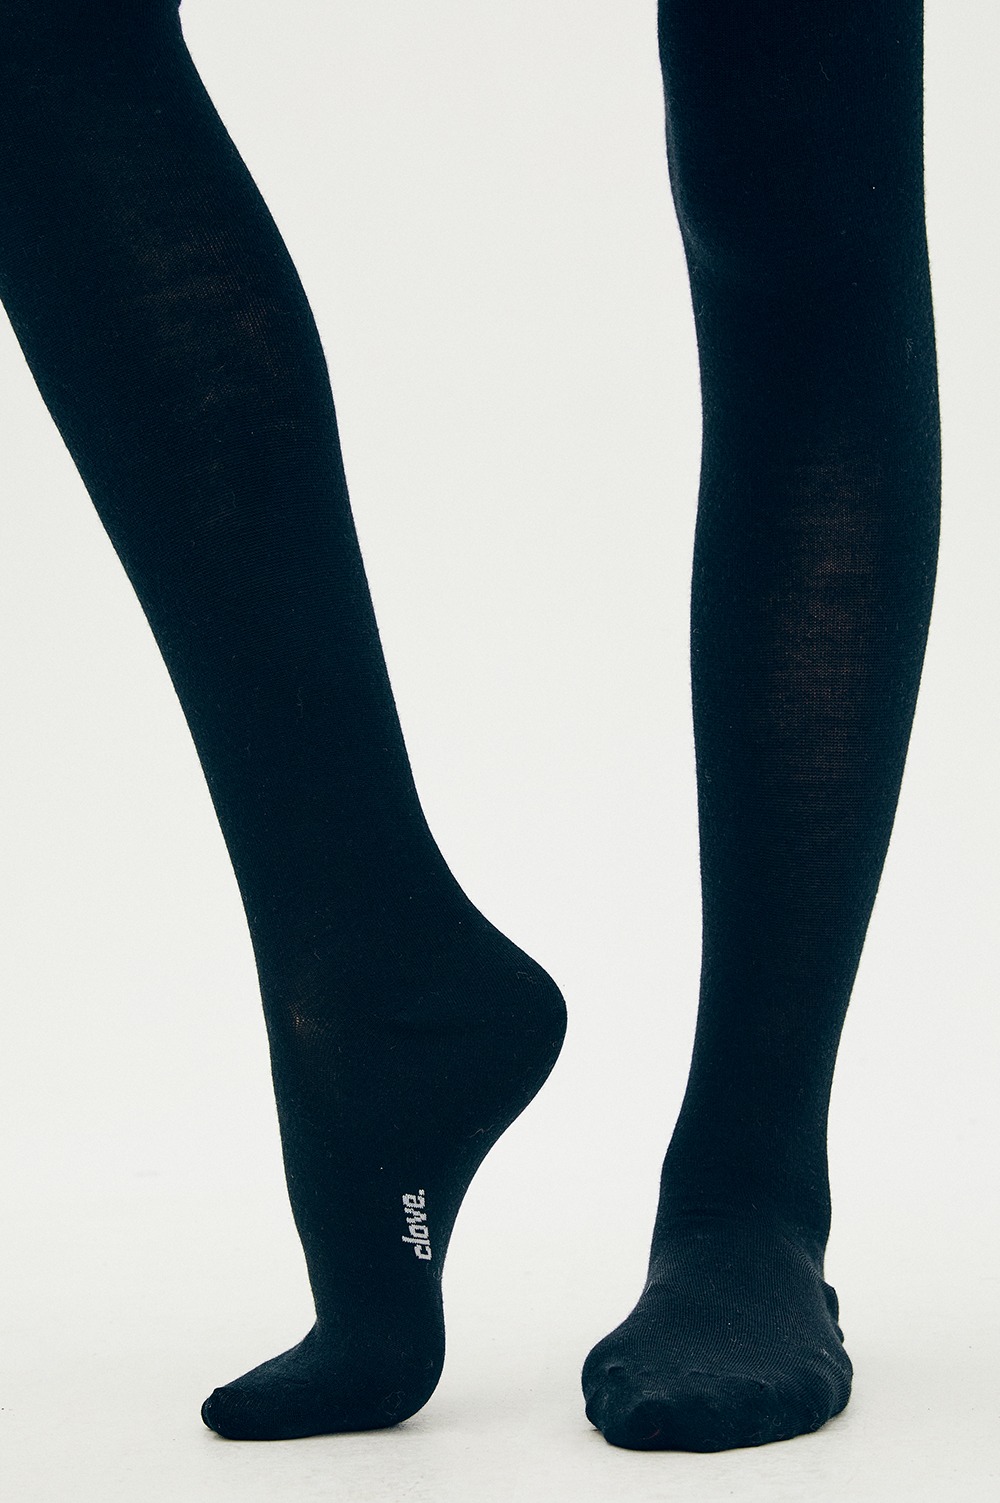 clove - [22FW clove] Wool Blended Tights (Black)